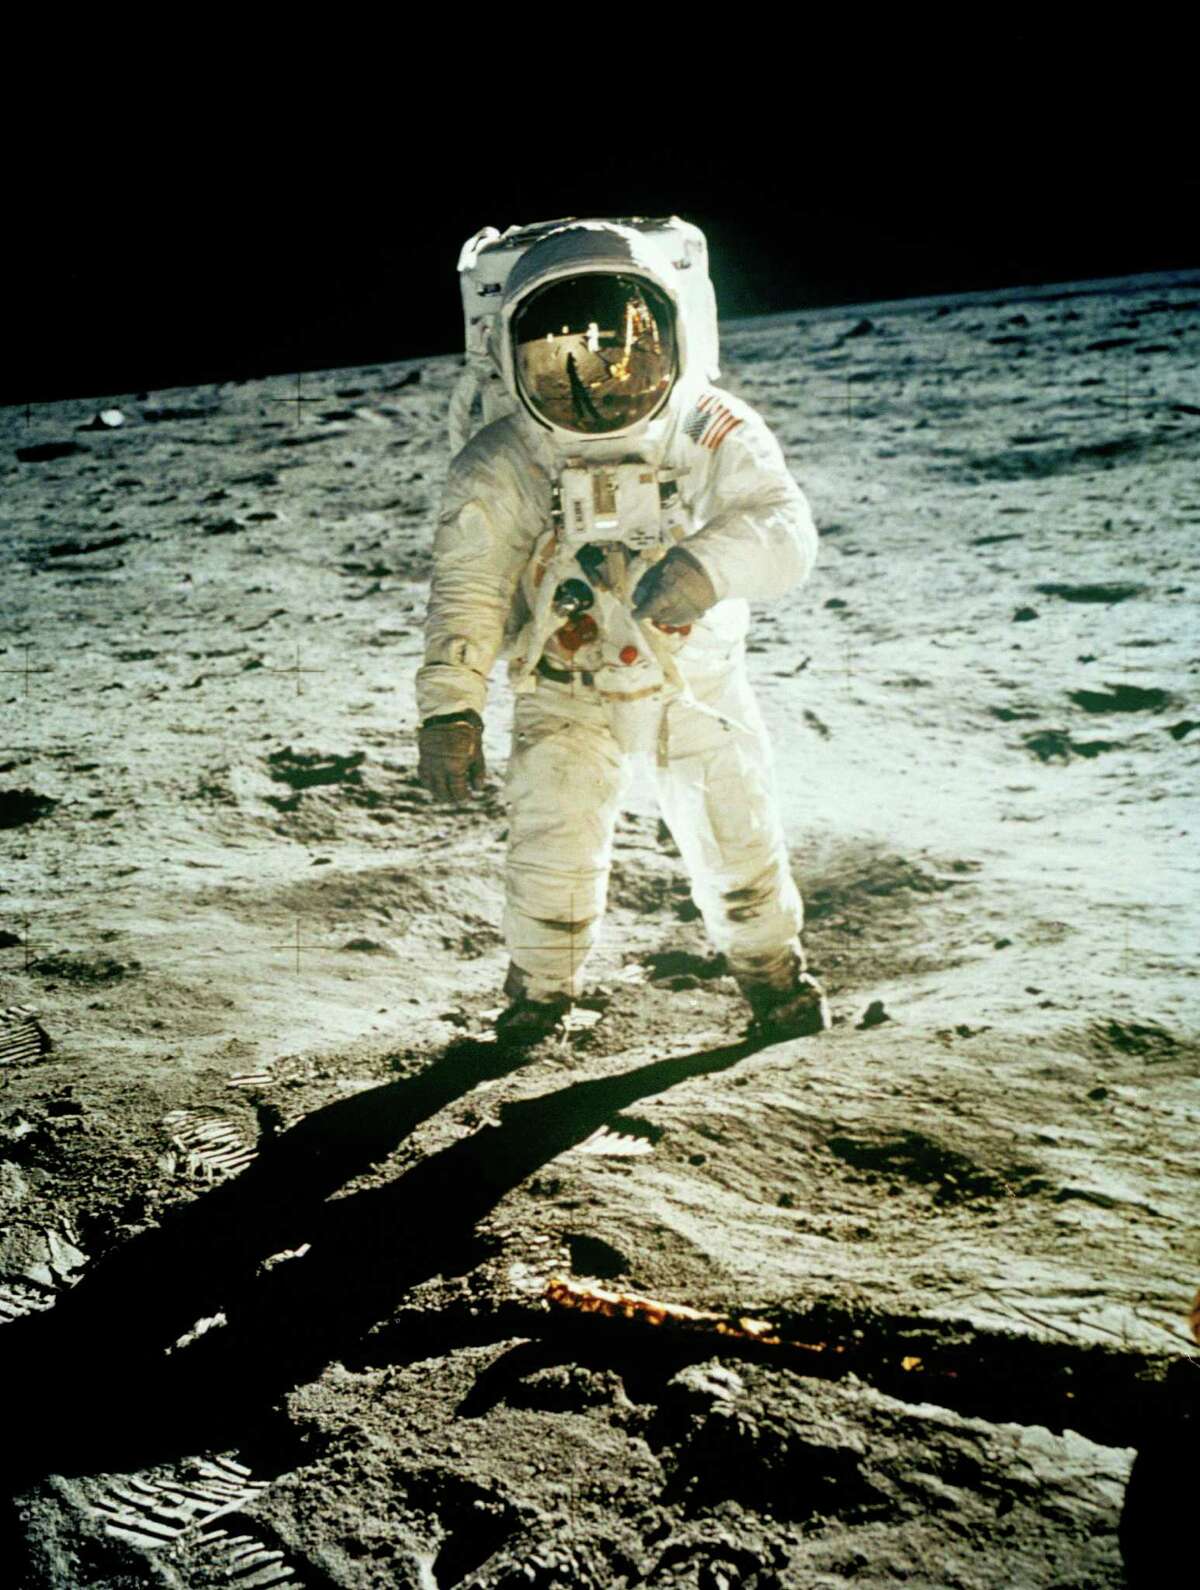  In this July 20, 1969 file photo from NASA, Astronaut Edwin E. Aldrin Jr., lunar module pilot, is photographed walking near the lunar module during the Apollo 11 extravehicular activity. (AP Photo, NASA ,file)